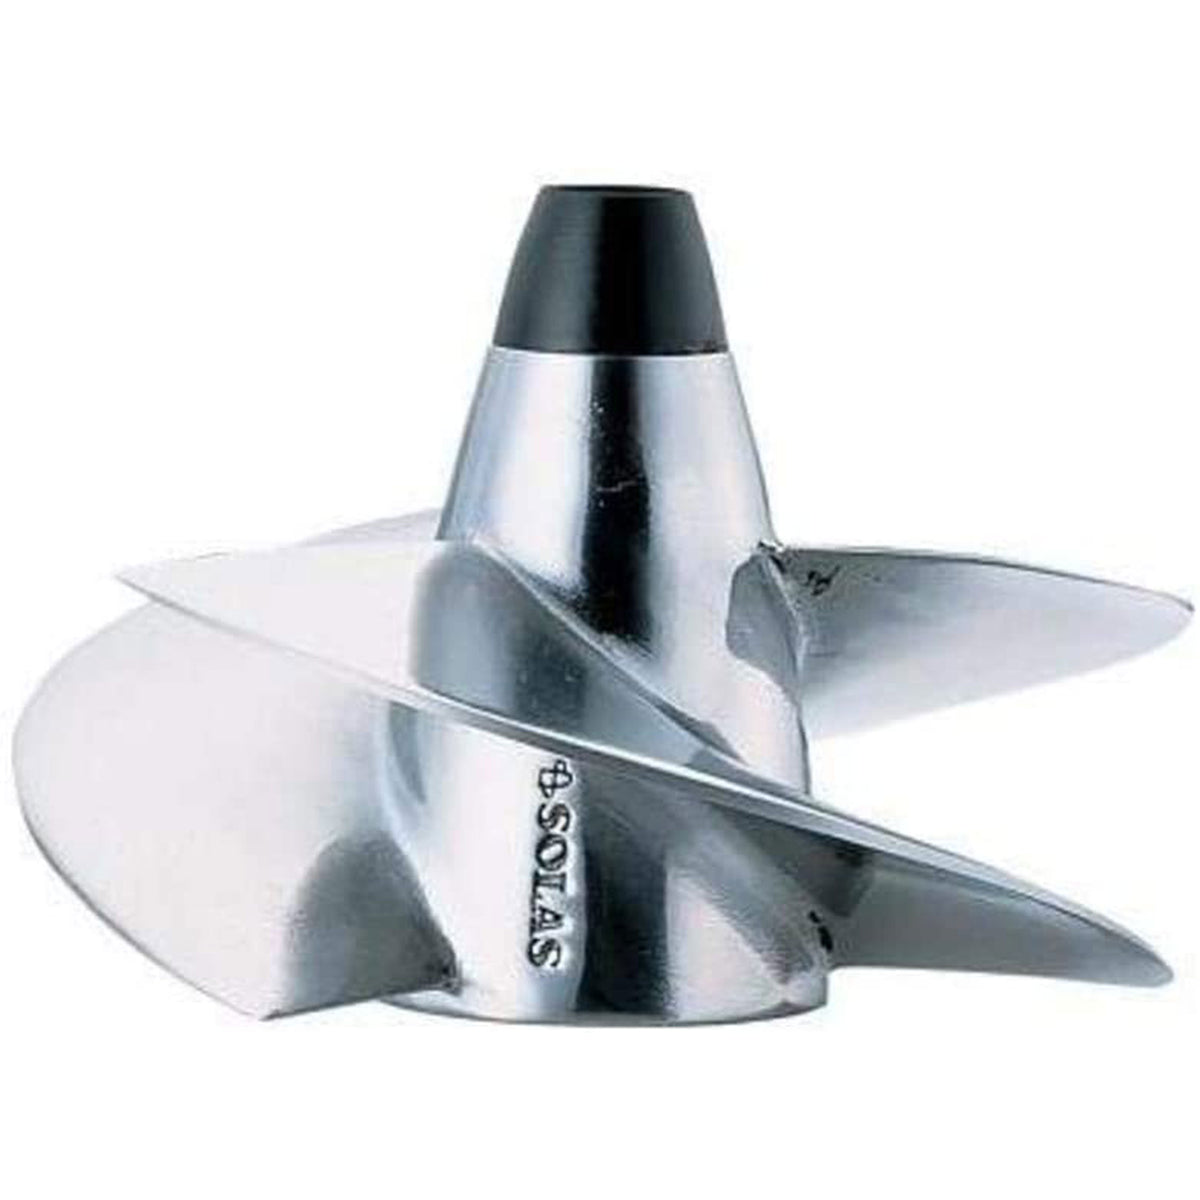 Solas SR-CD-12/20 Concord 4-Blade Impeller for Select Sea-Doo PWC with 155.5mm Pump Diameter